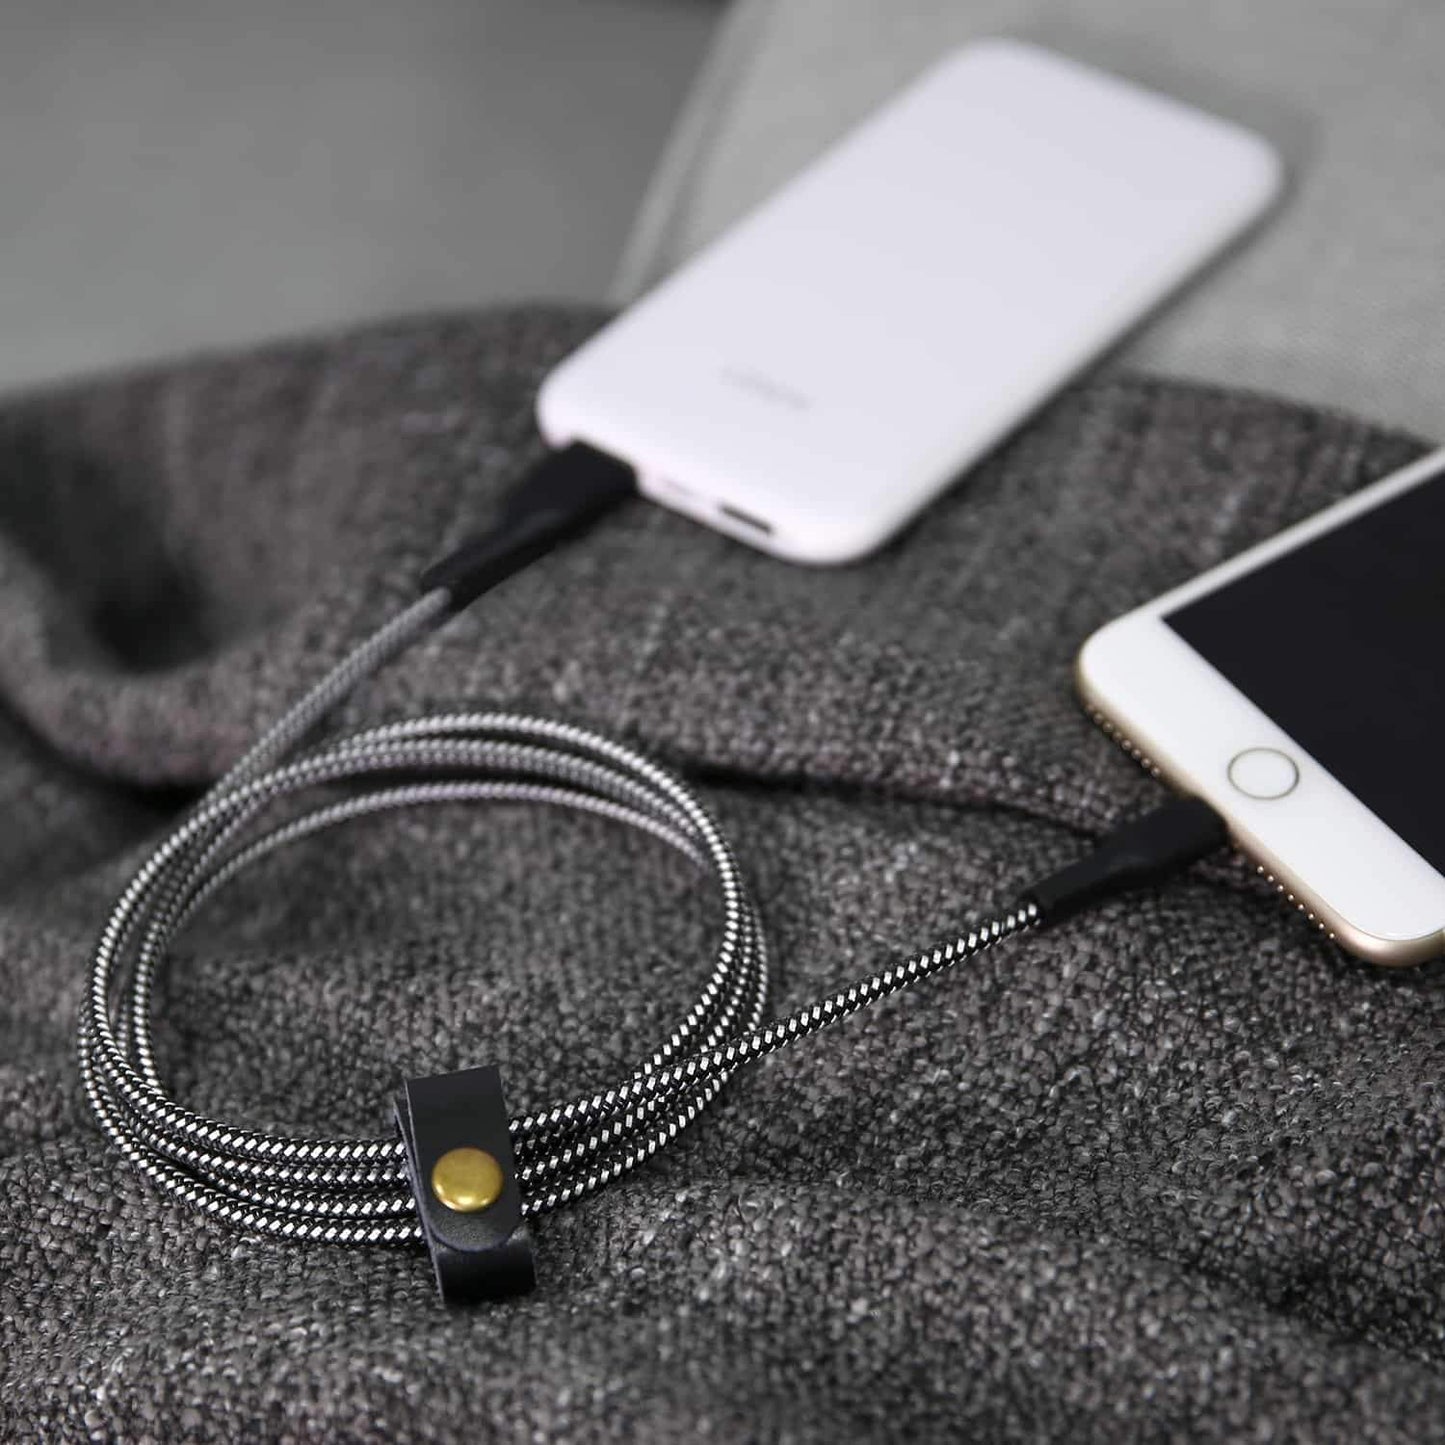 Aukey CB-AL1 Nylon Braided Lightning to USB Cable for Sync and Charging